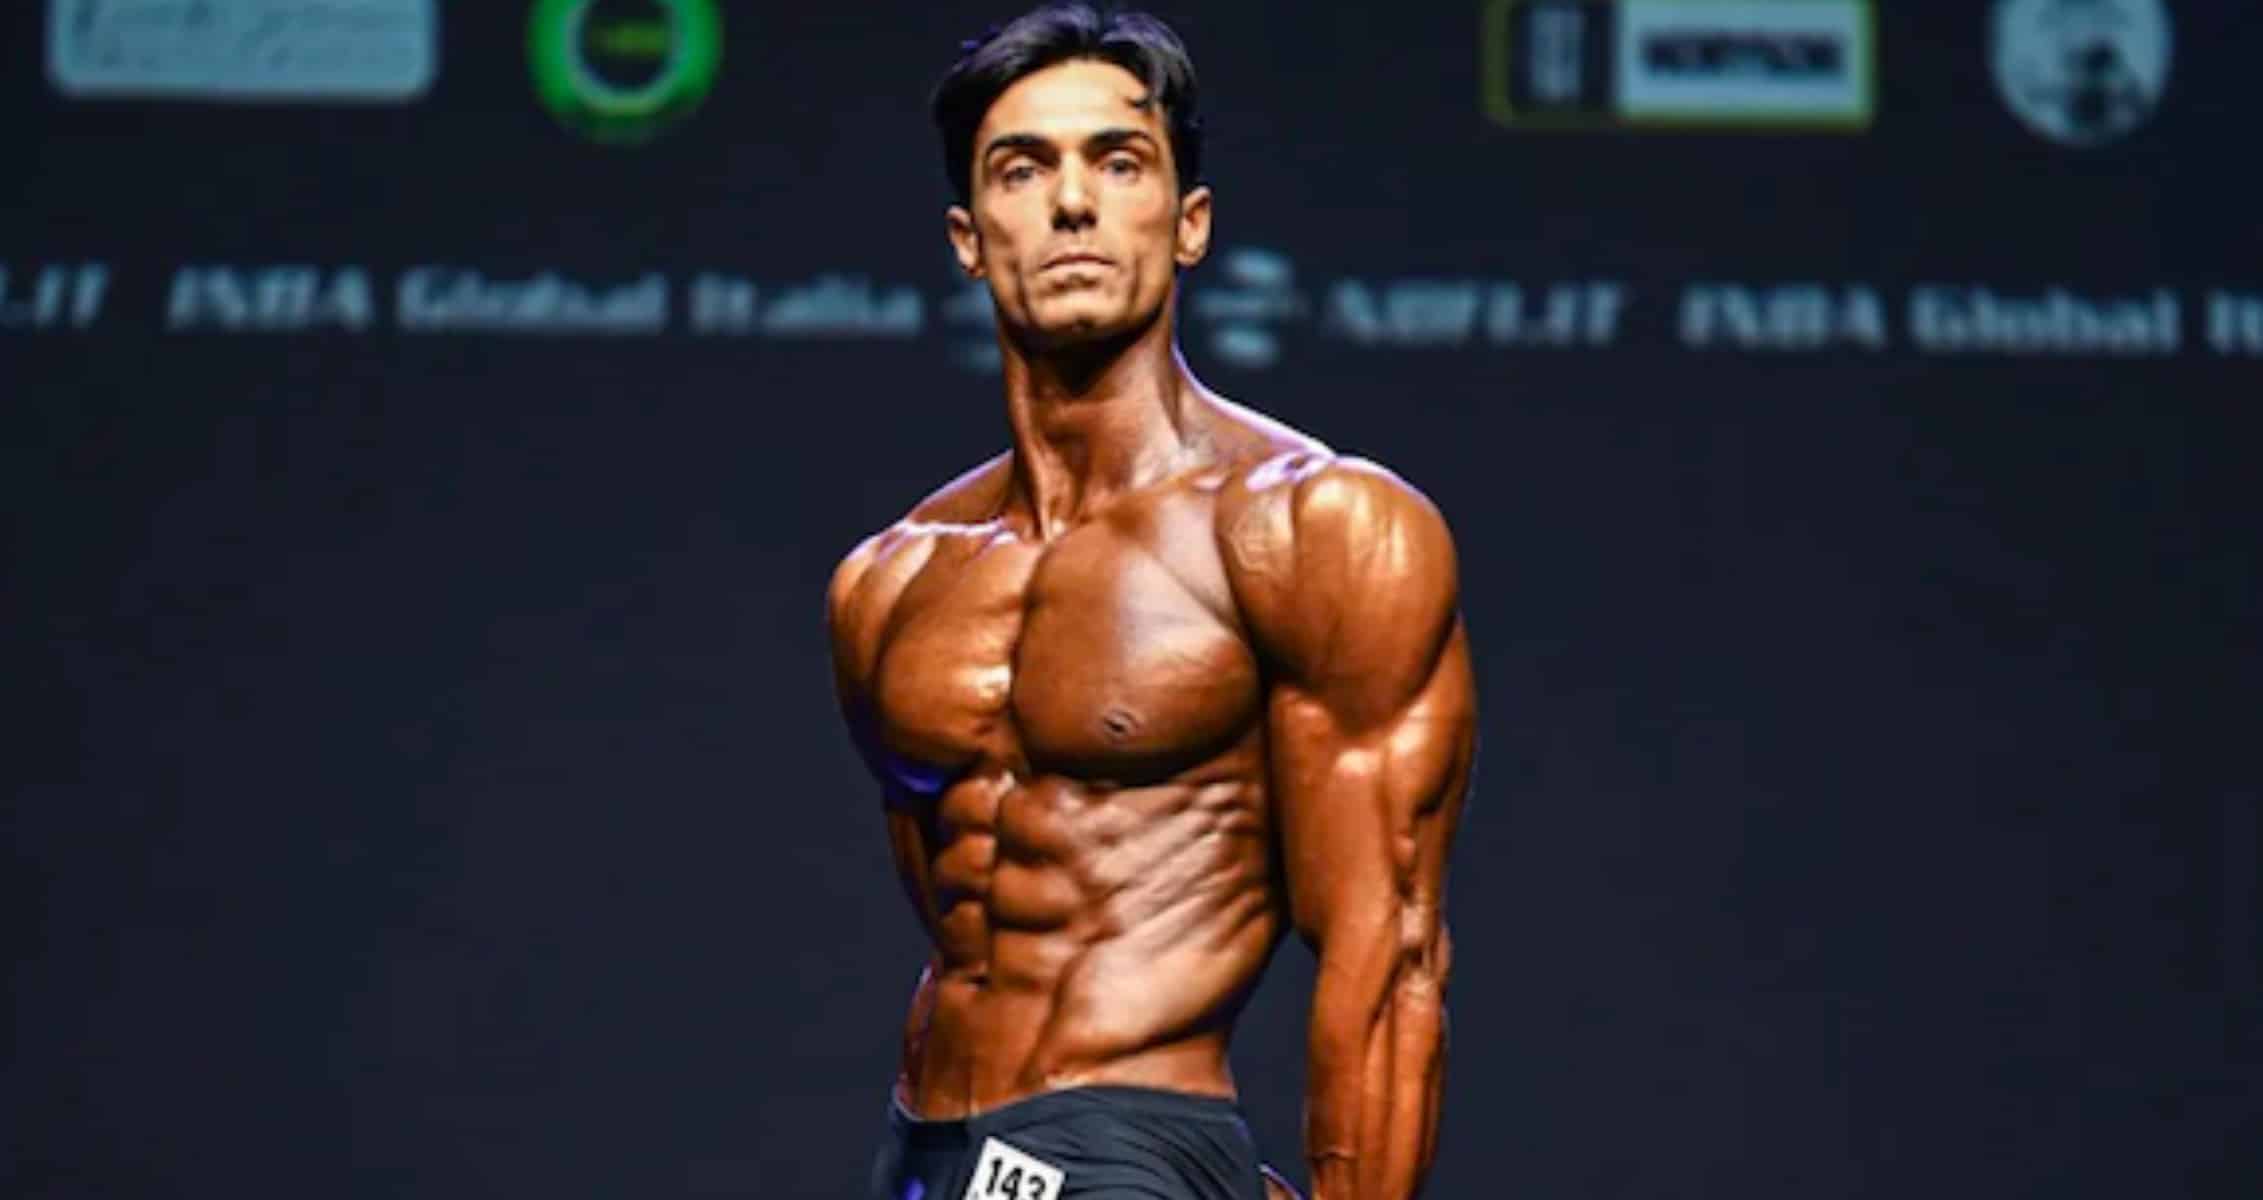 Luigi Musella's Natural Olympia training and diet